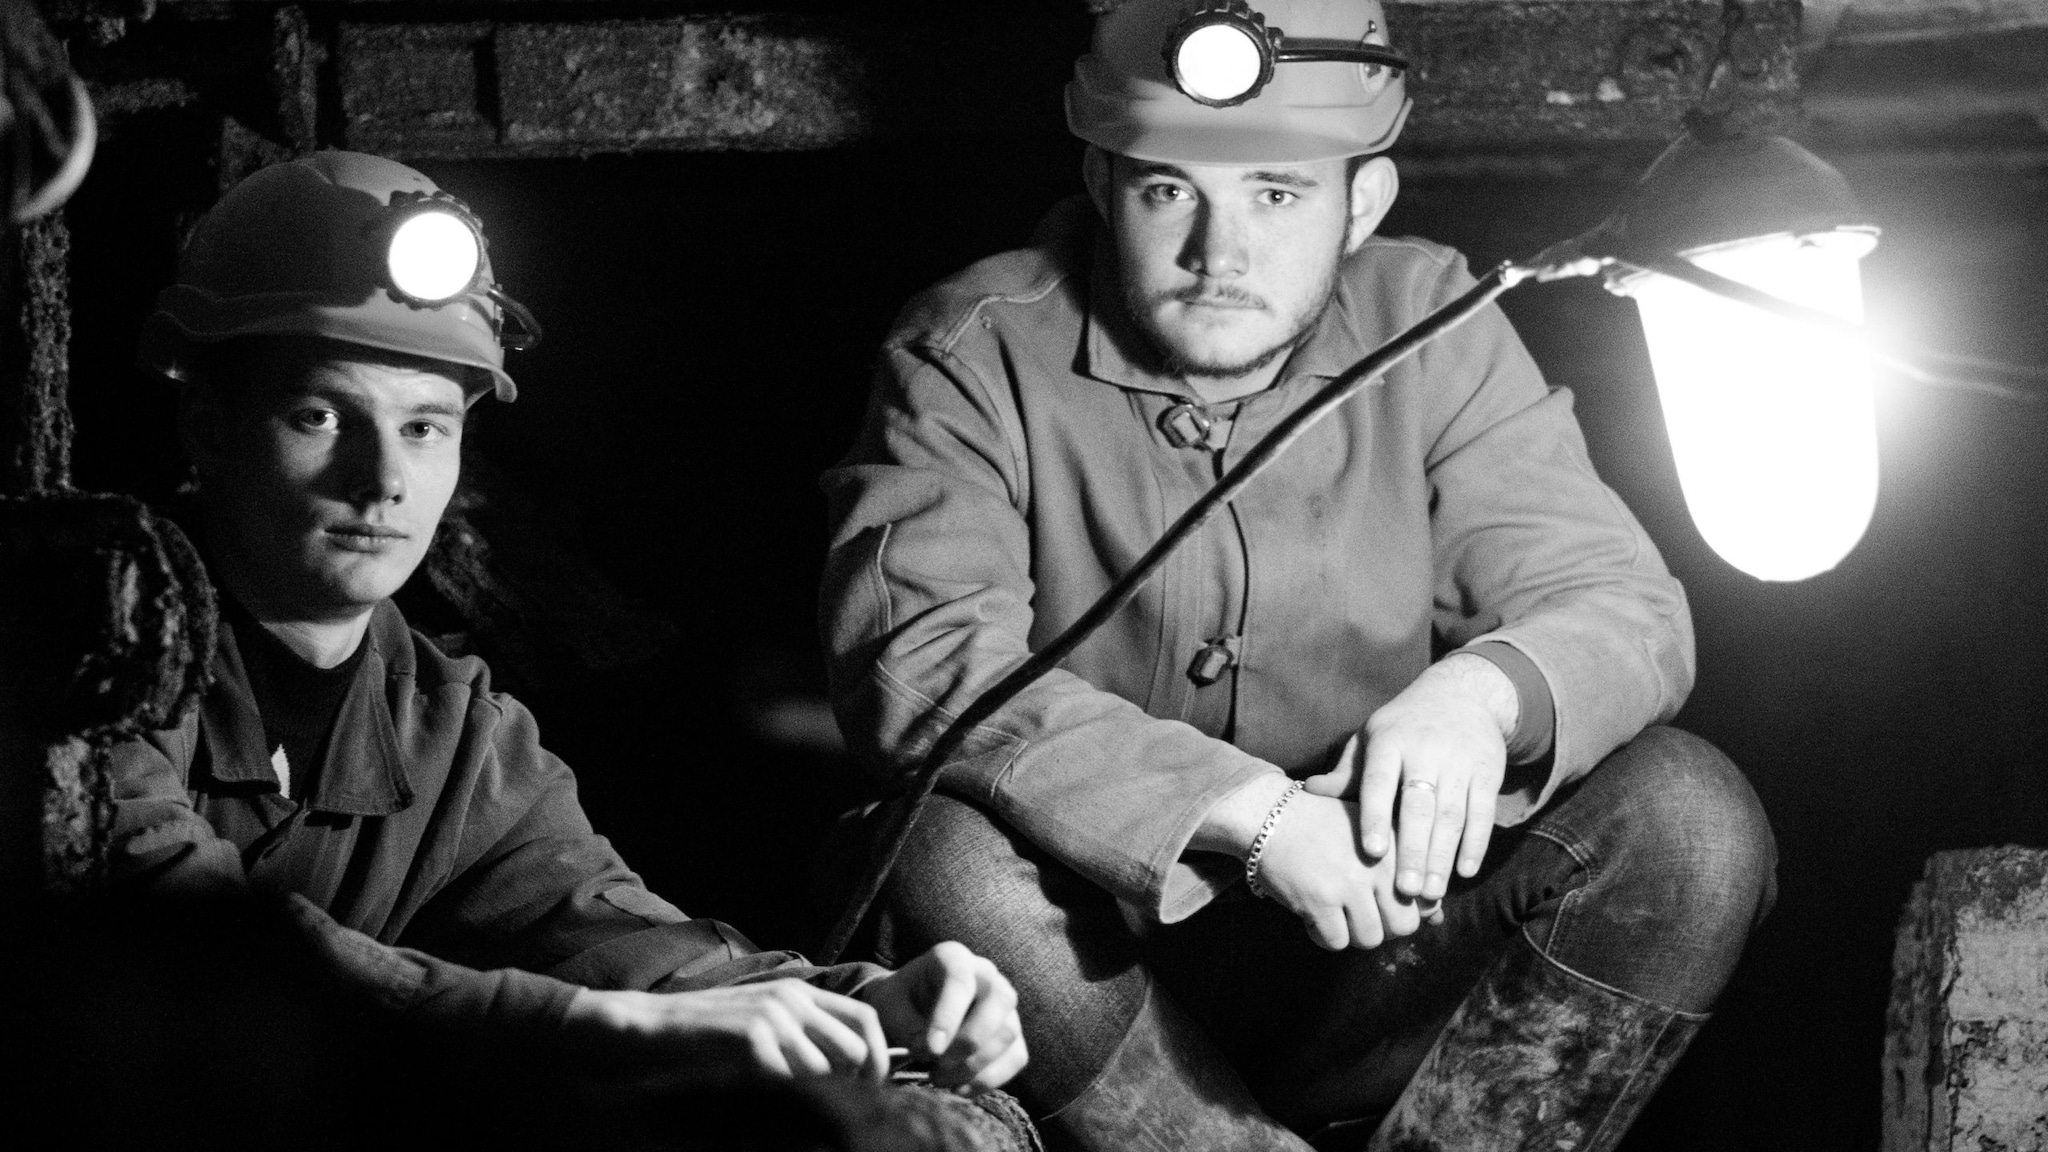 Two coal miners sitting in underground mine.